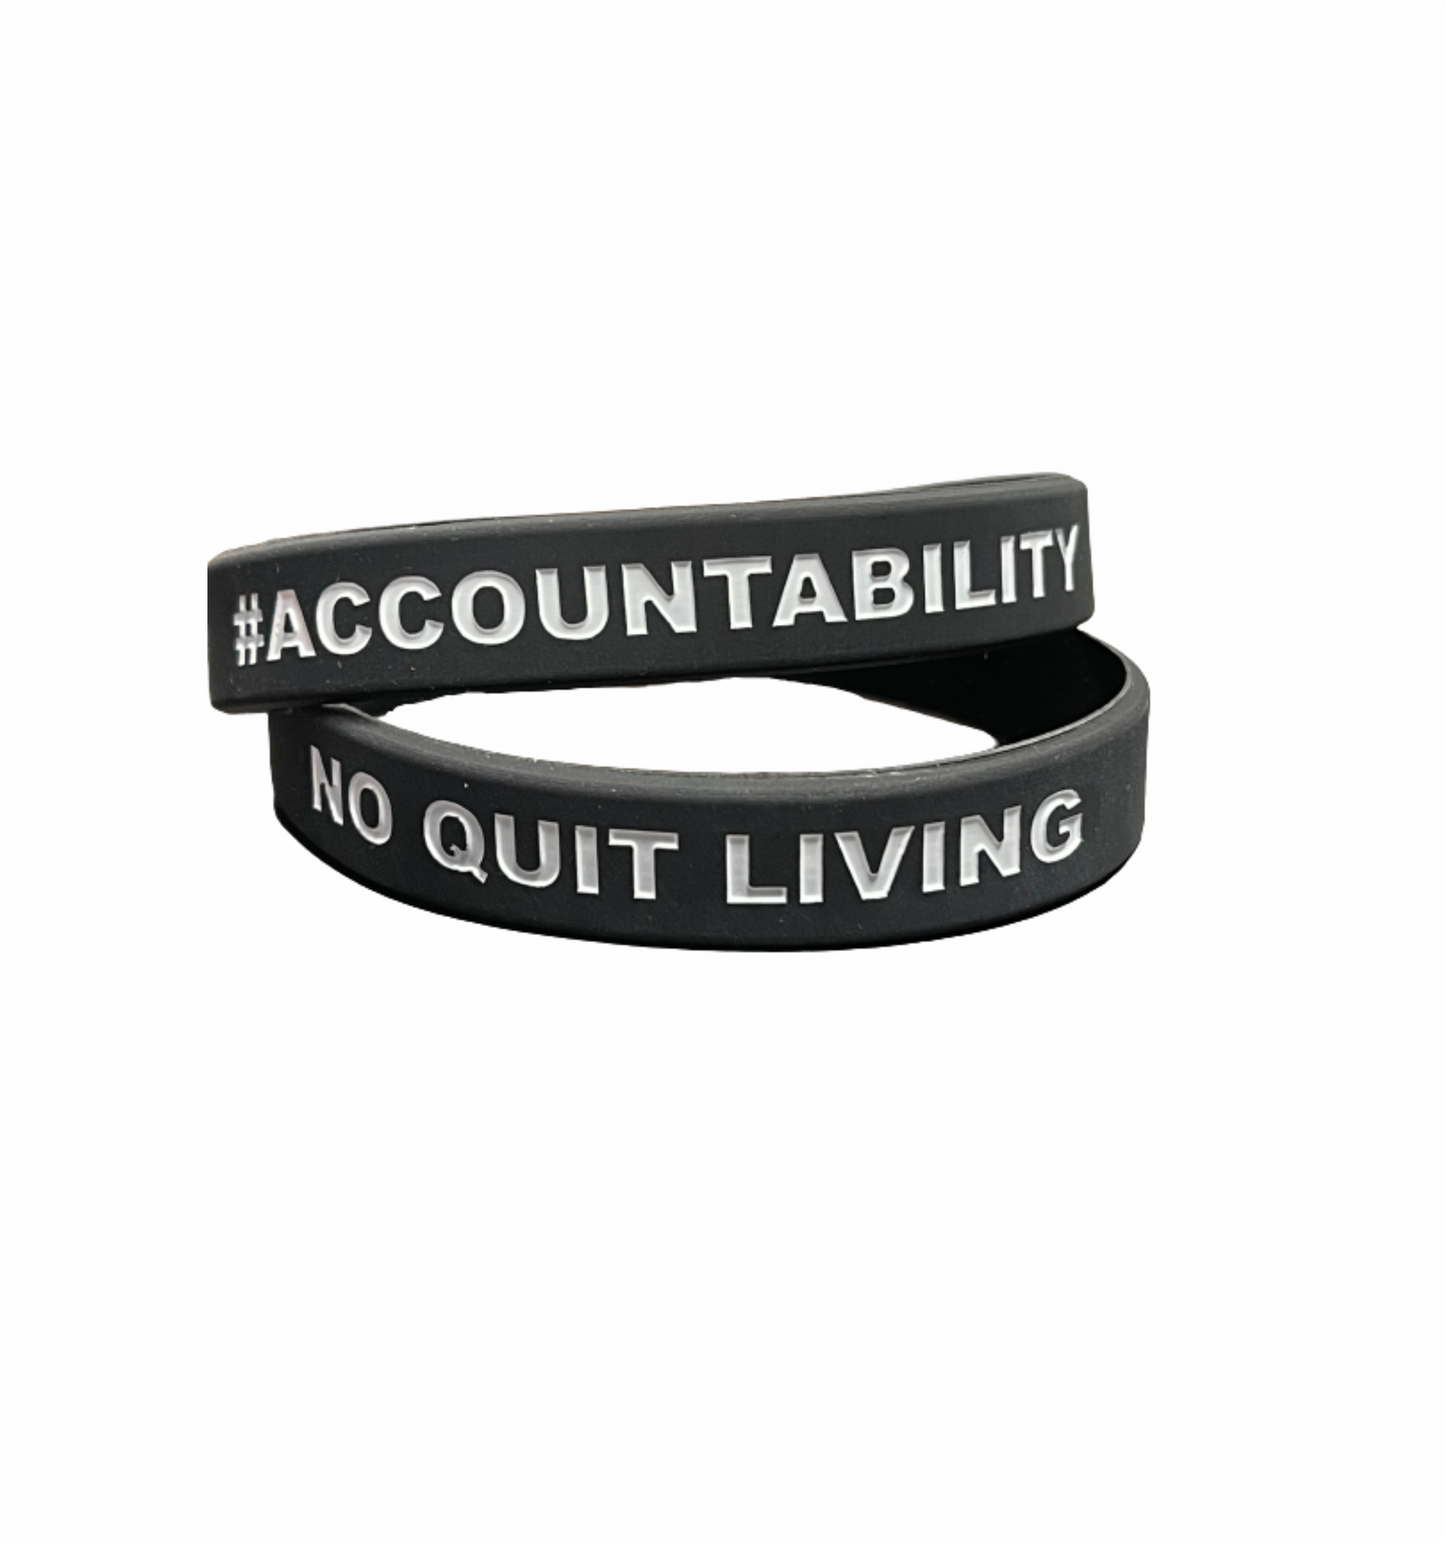 No Quit Living Silicone Wristband - Pack of 100